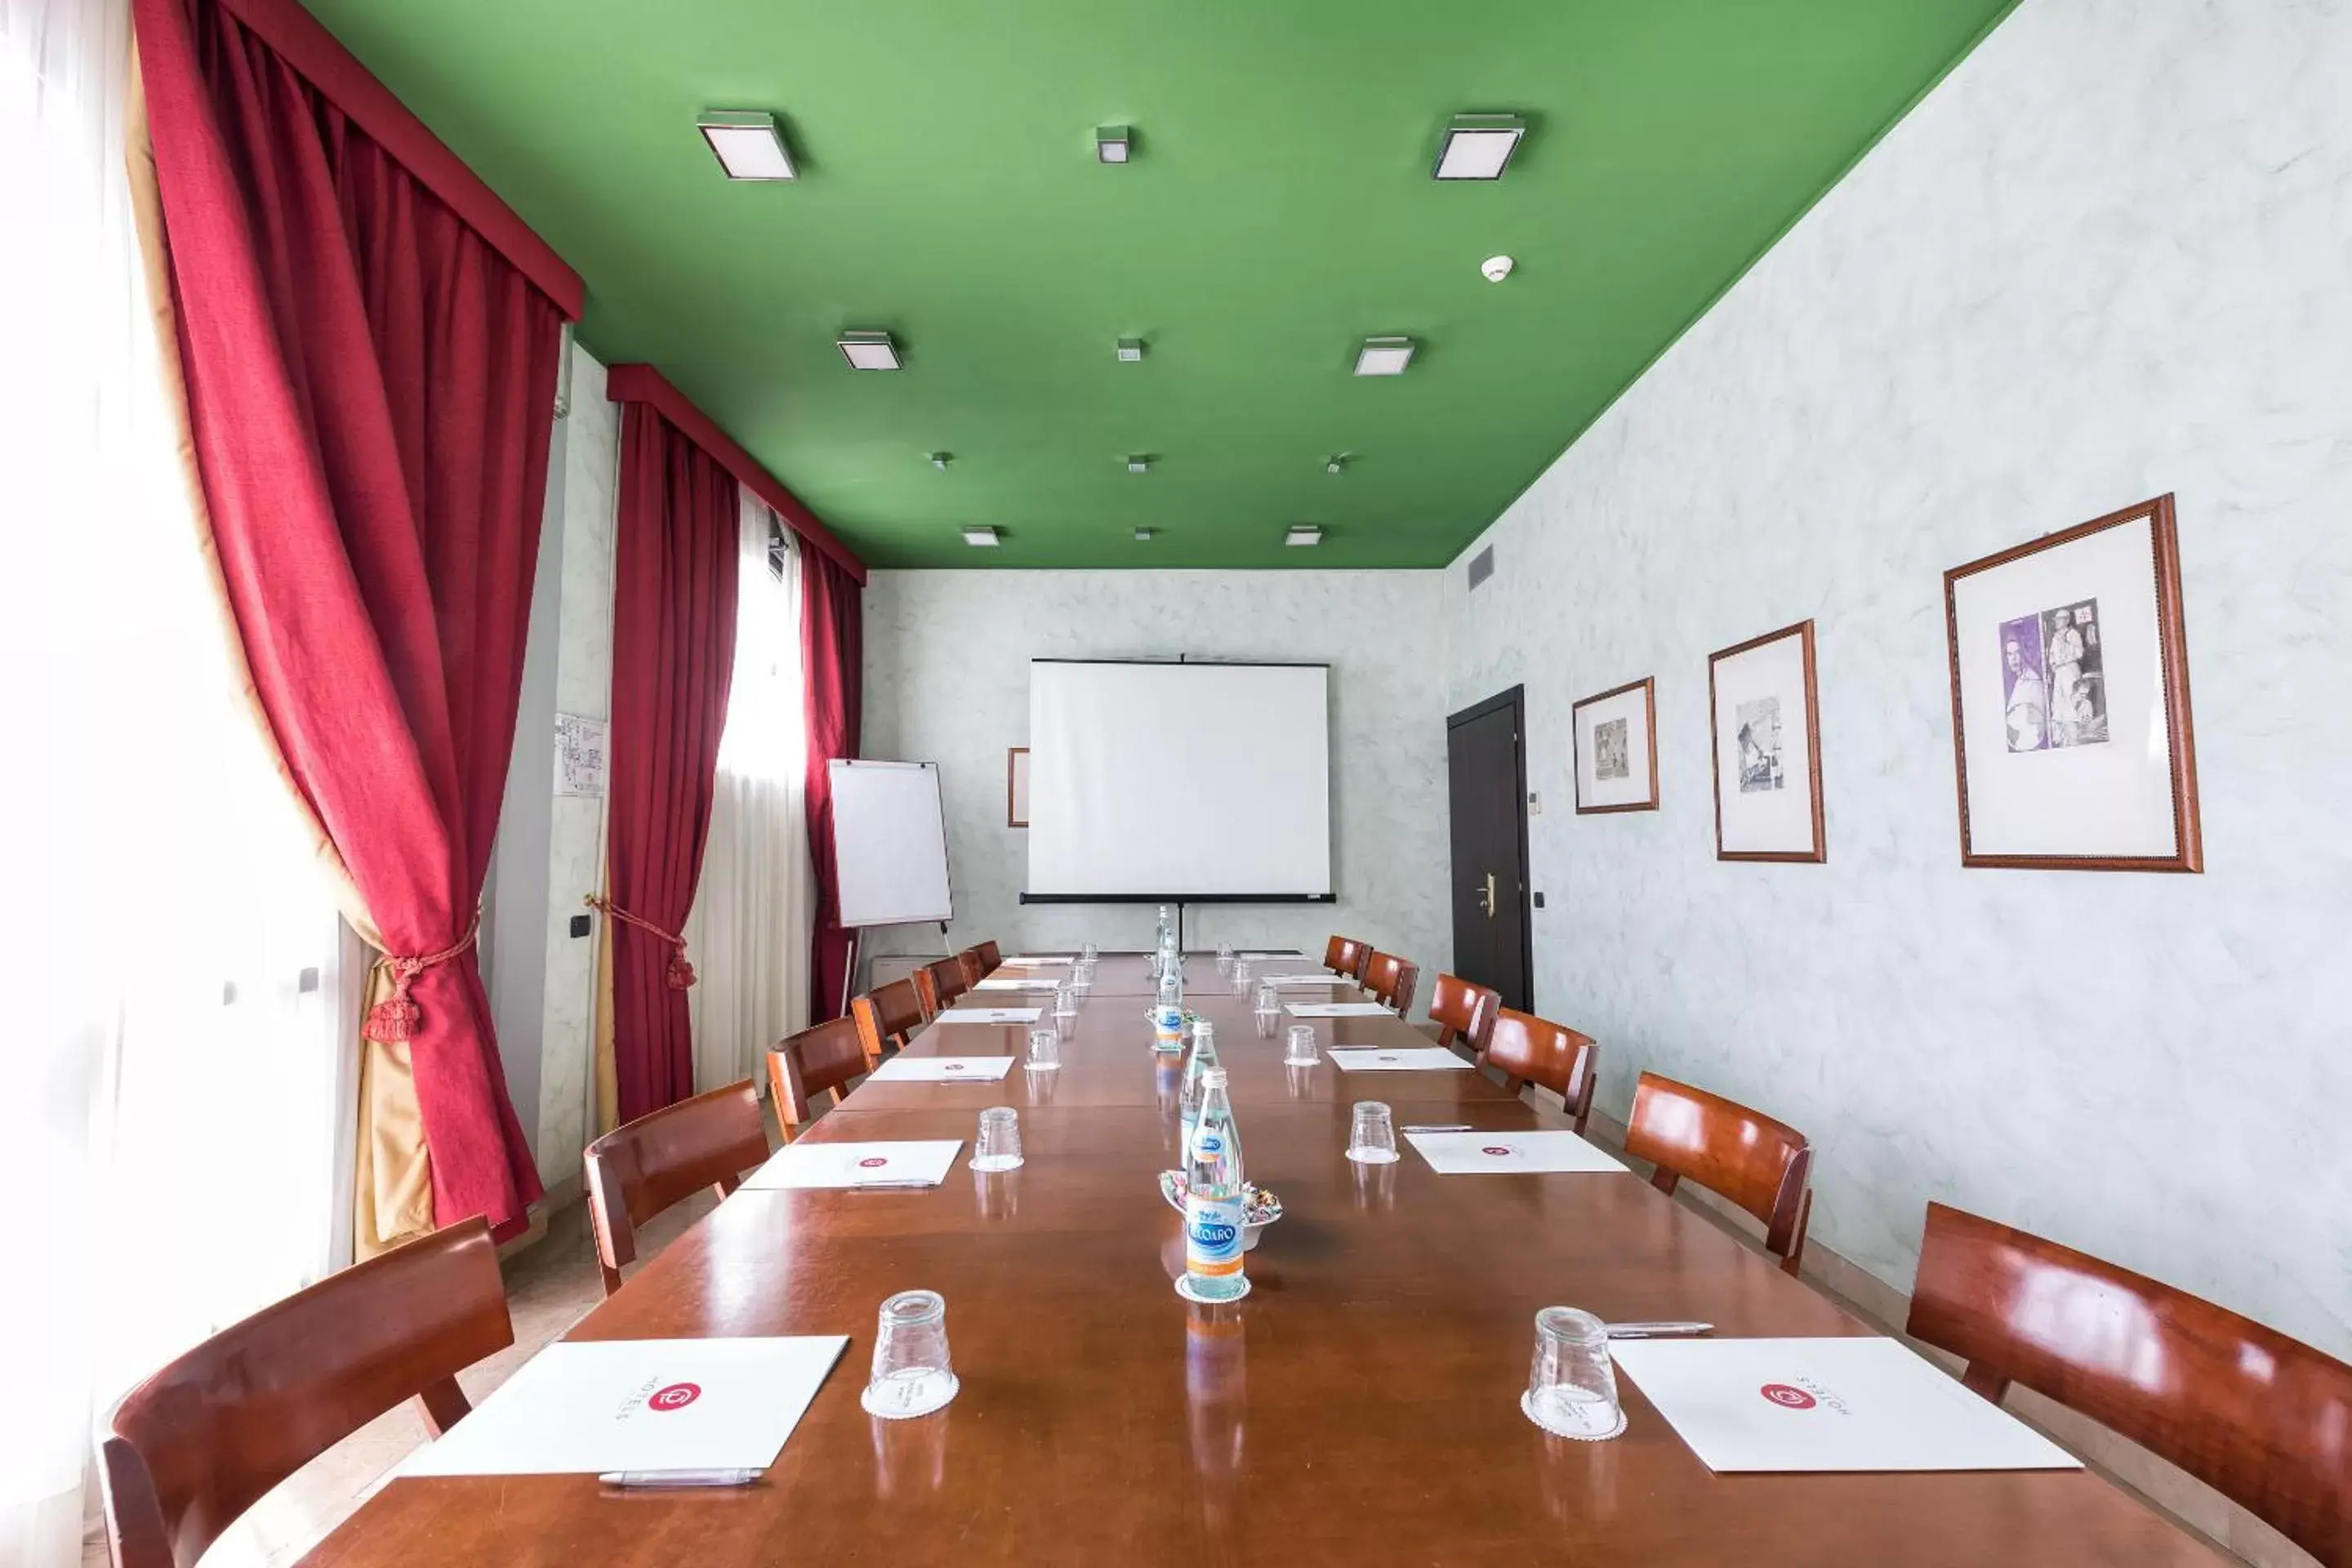 Meeting/conference room in Hotel Villa Malaspina